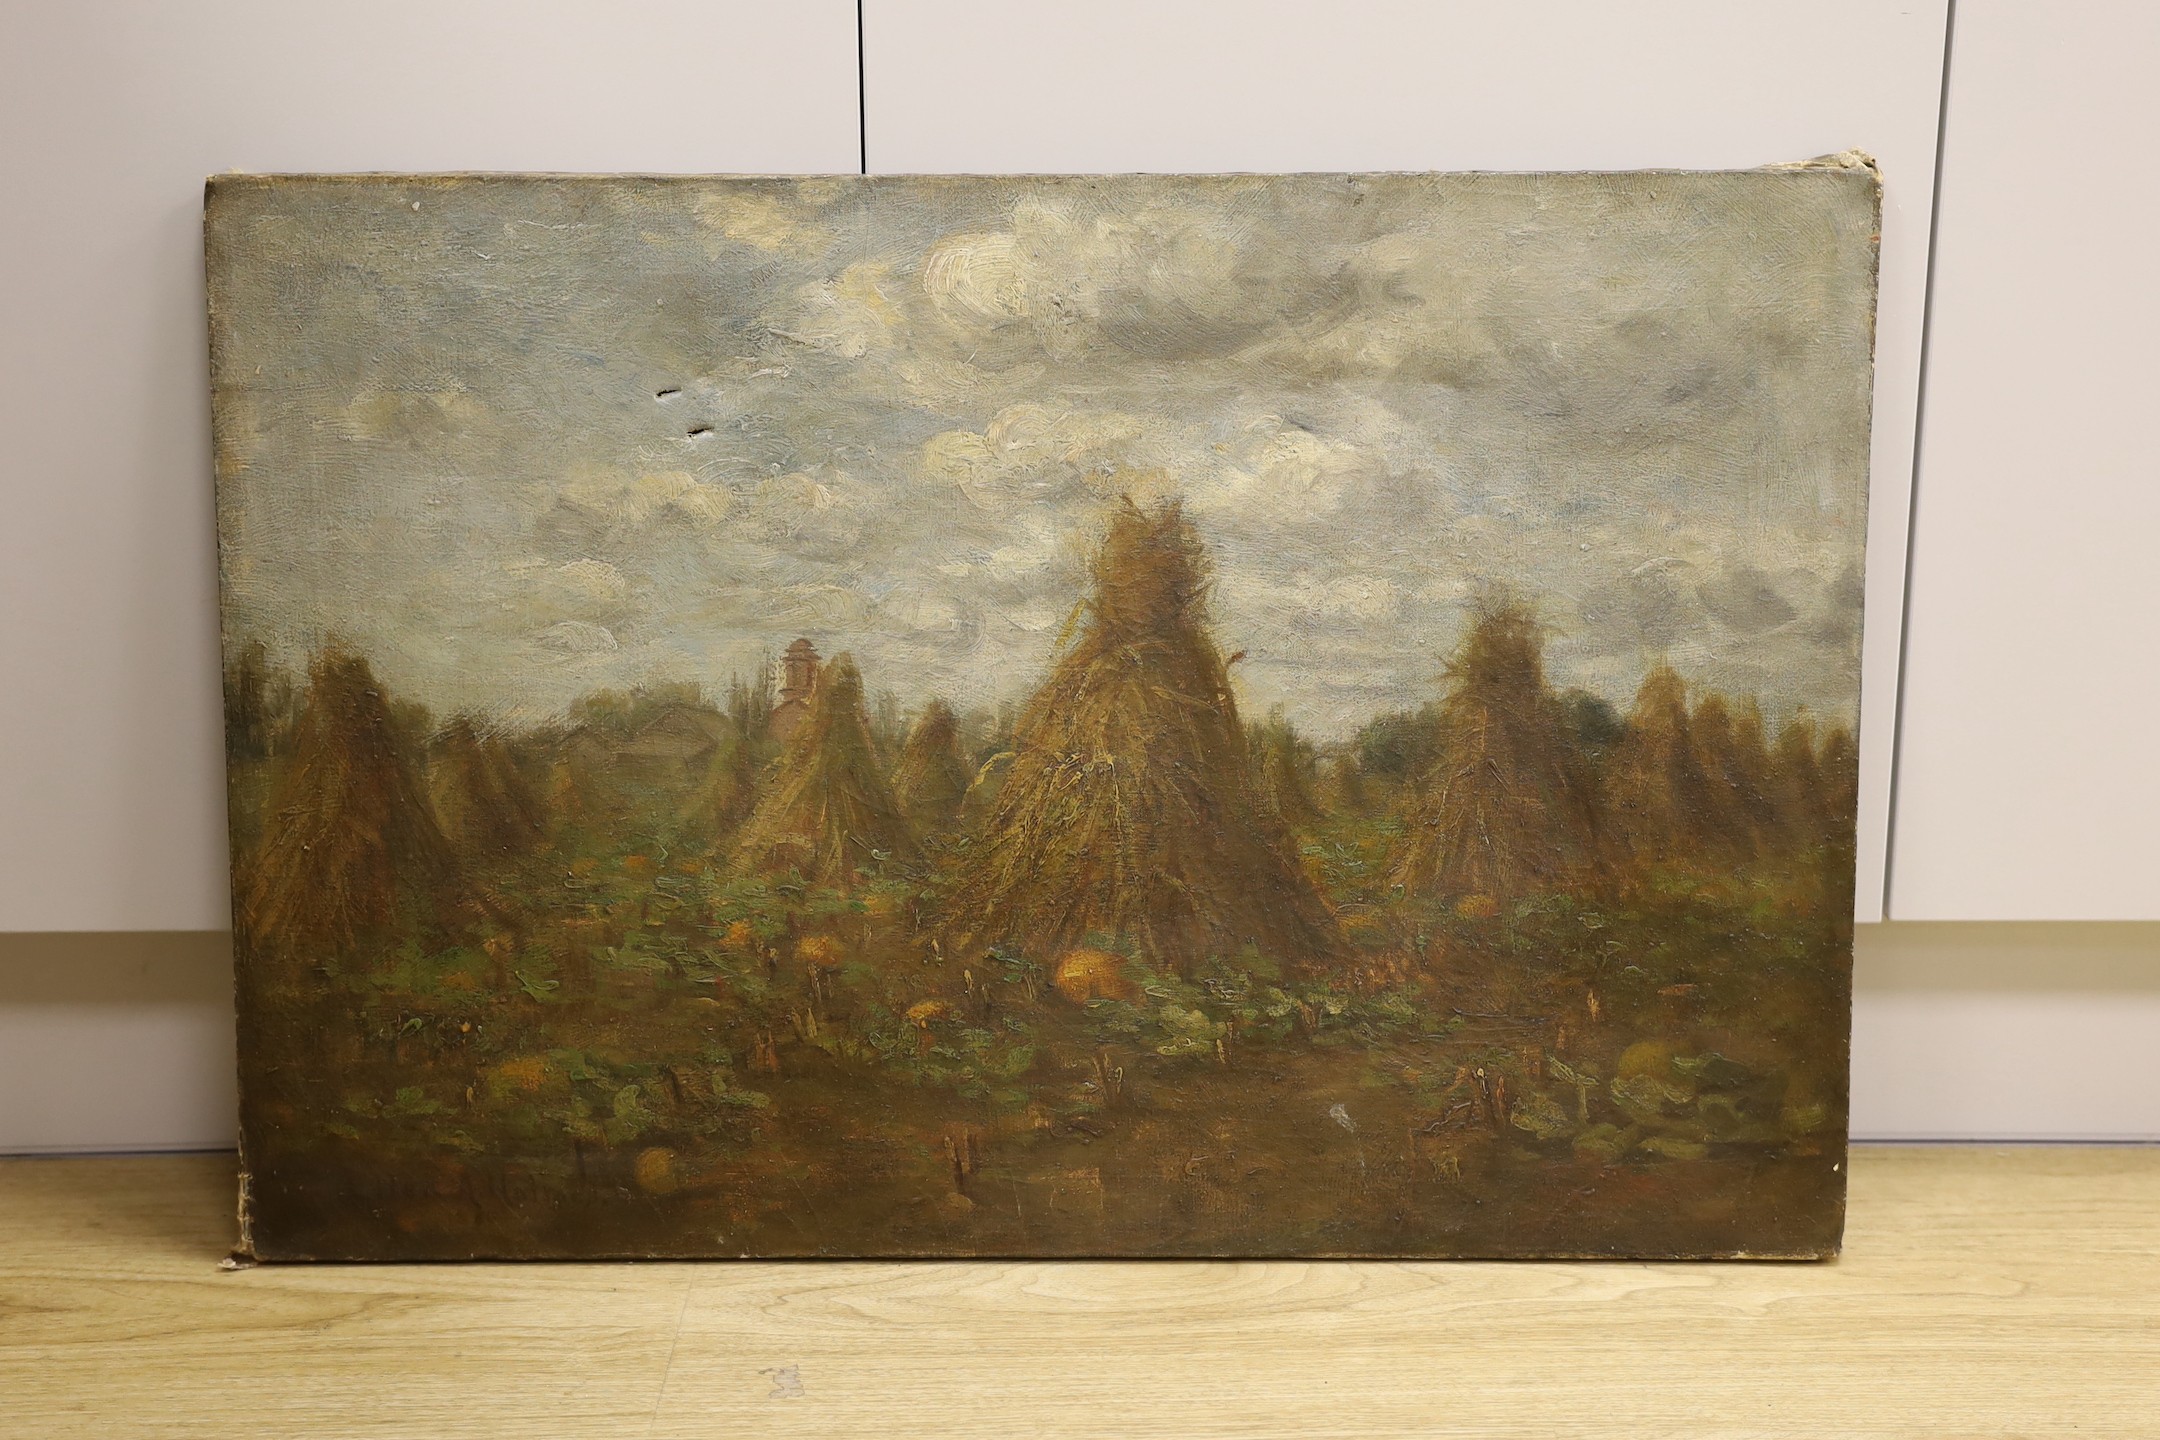 E.H. Holmes (19th C.), oil on canvas, Cornstacks and pumpkins in a field, signed and dated 1880, 51 x 77cm, unframed